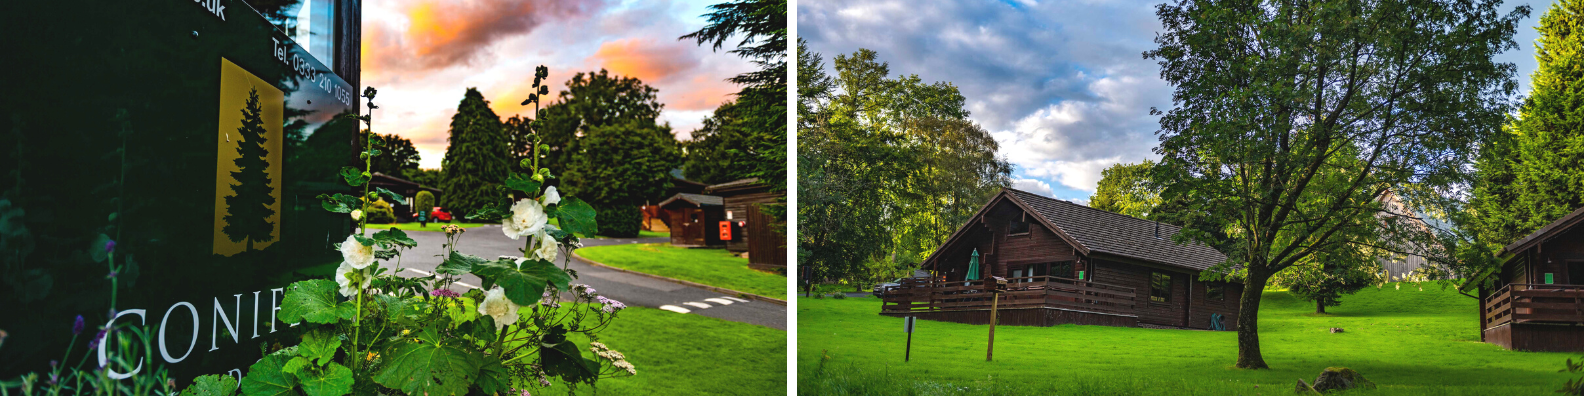 Conifer Lodges in Dumfries & Galloway